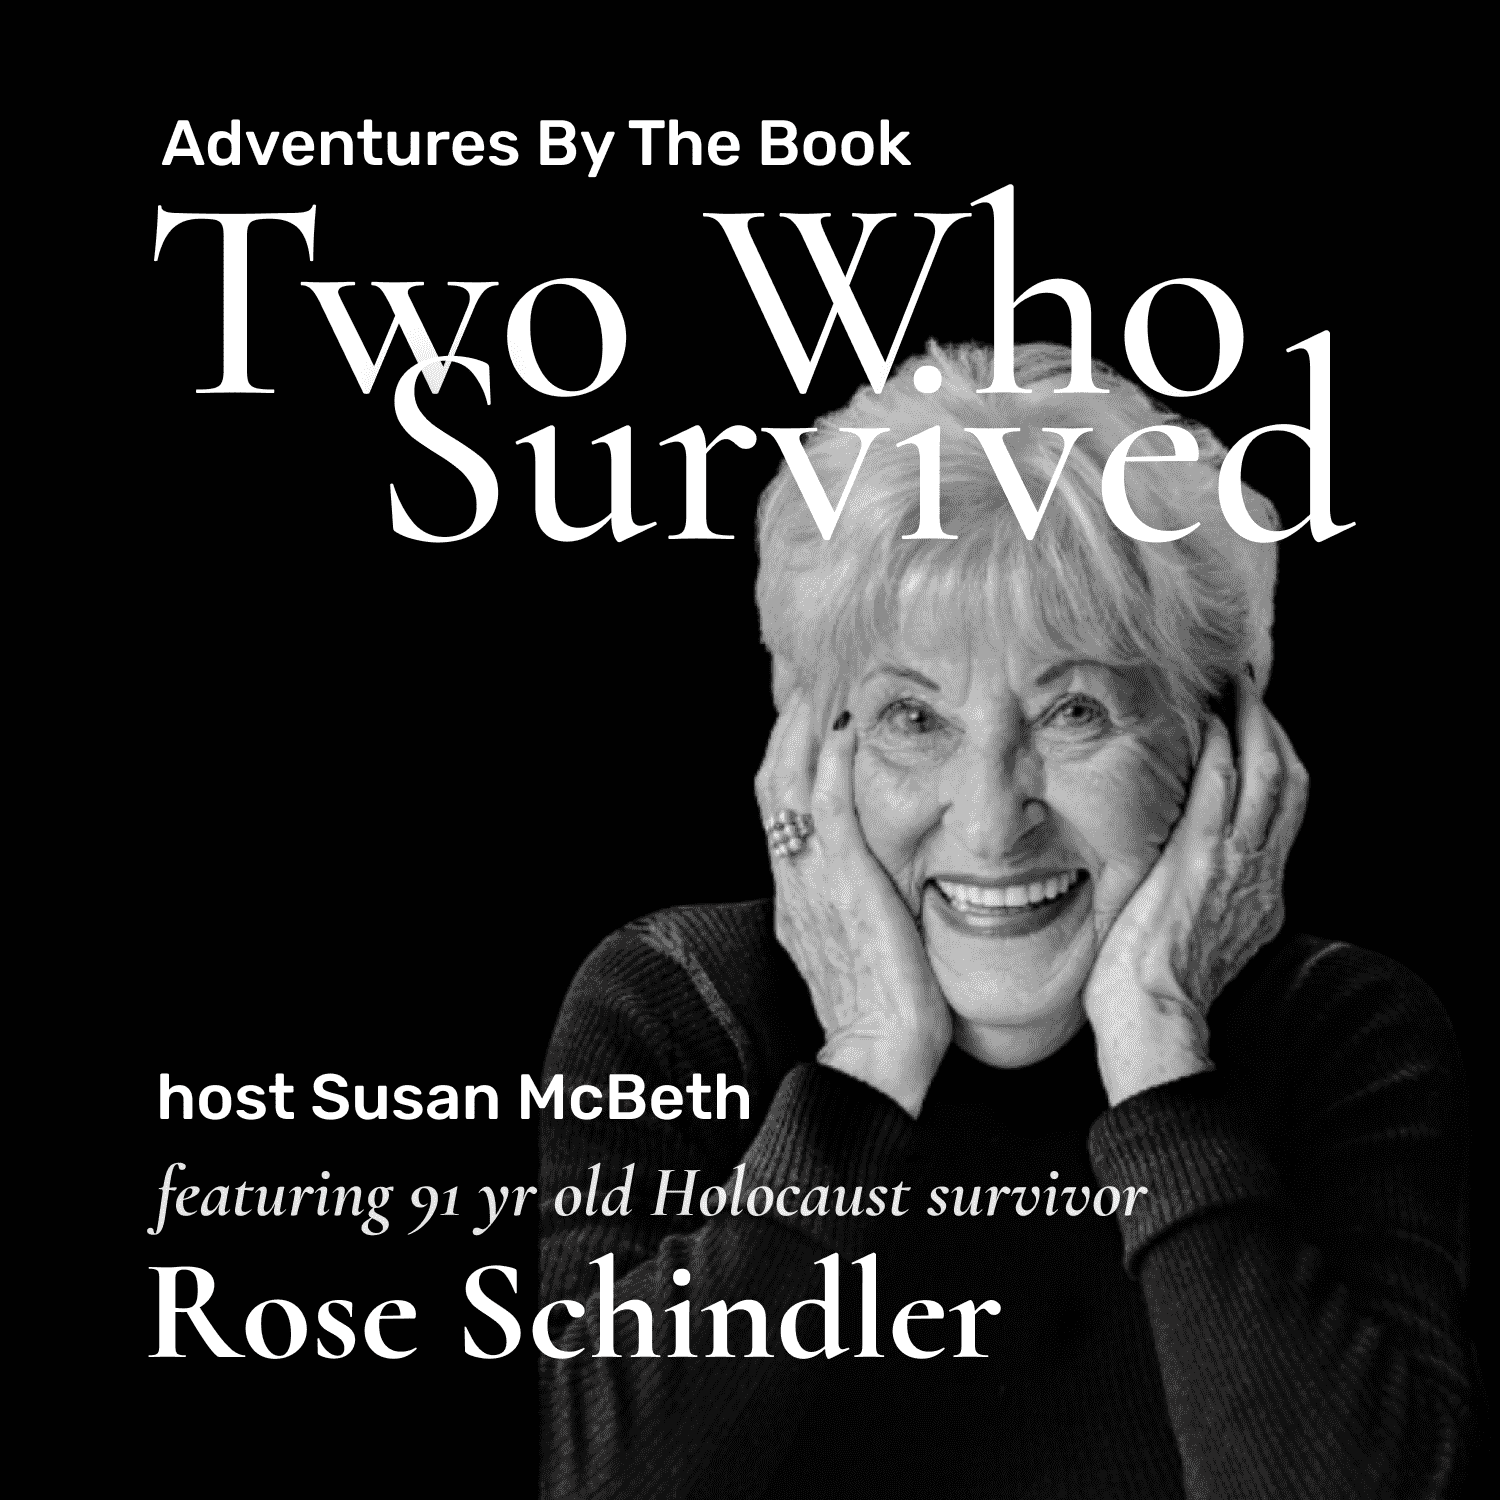 Adventures by the Book: Two Who Survived